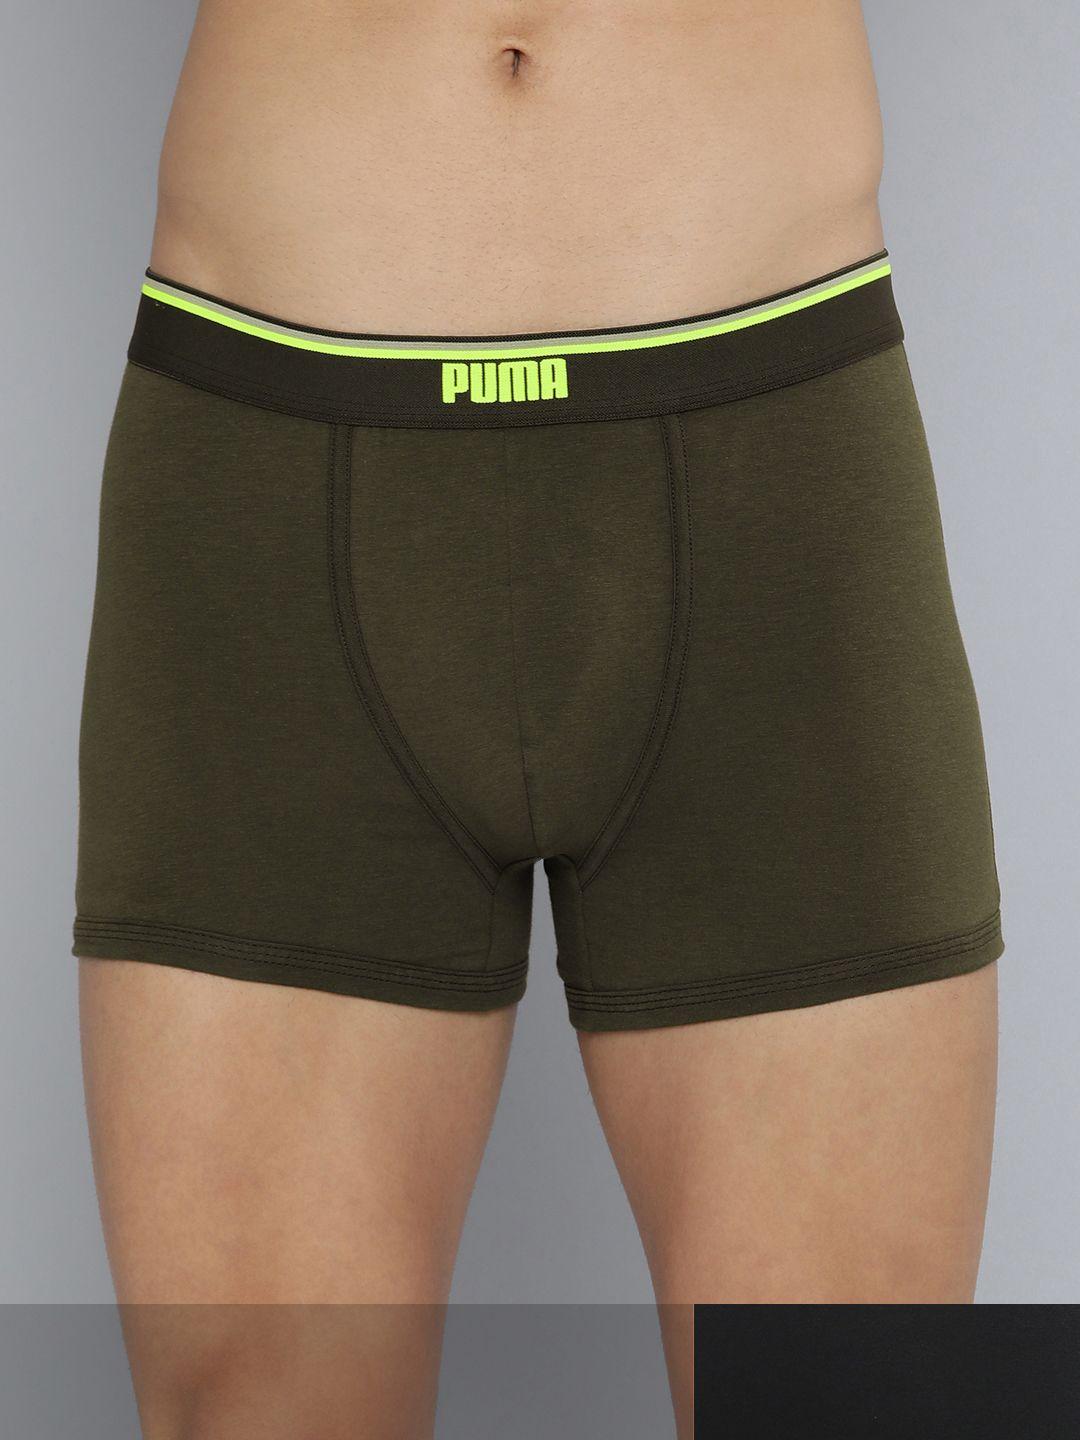 puma-men-pack-of-2-solid-anti-microbial-stretch-trunks-93212501